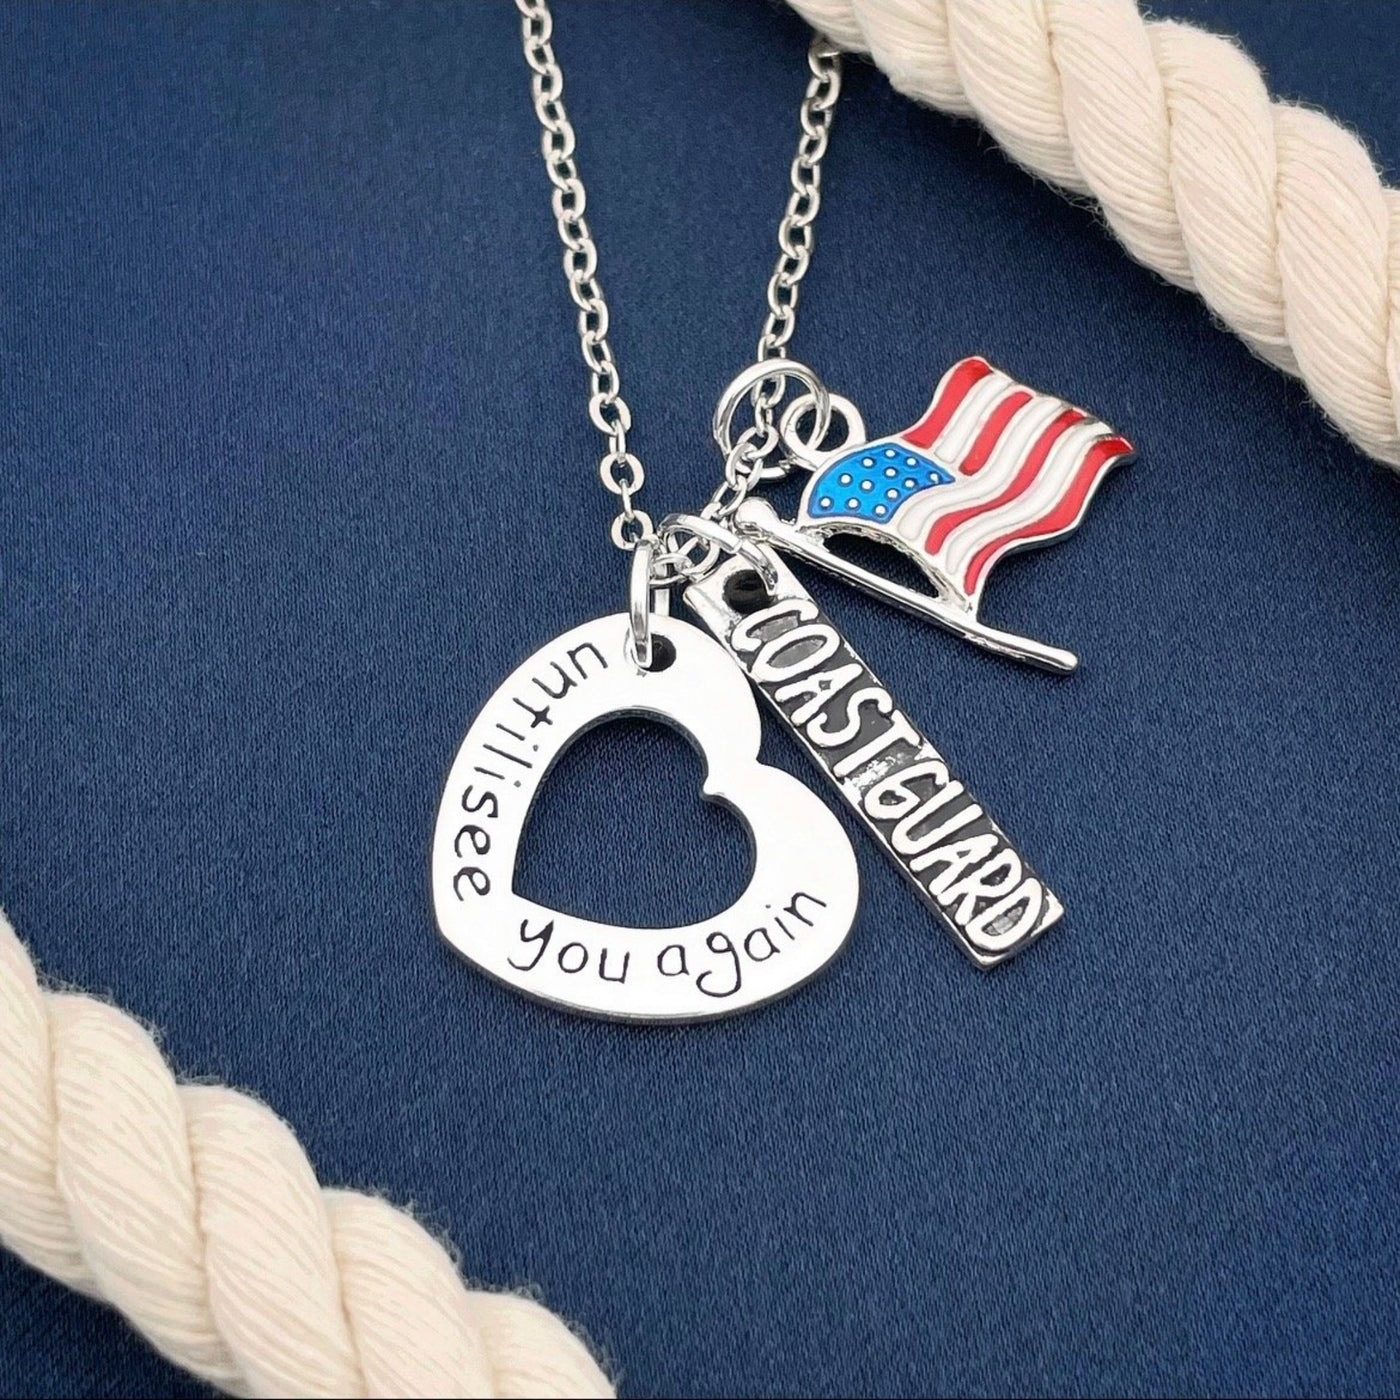 Until I See You Again Necklace - Coast Guard